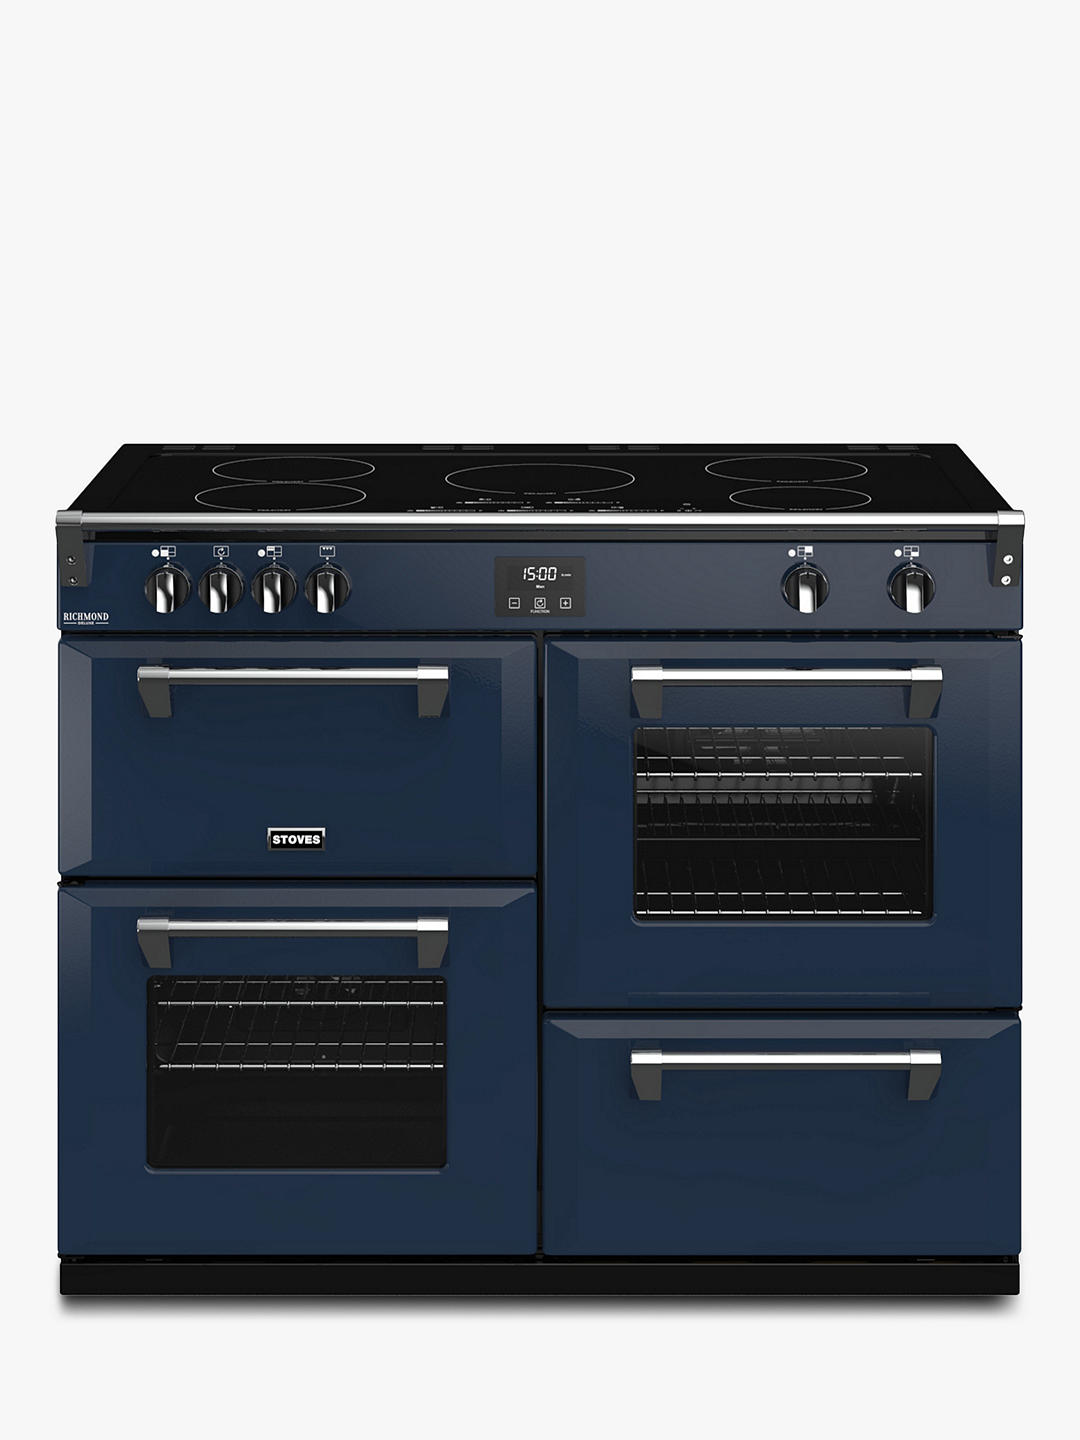 Best electric stoves uk